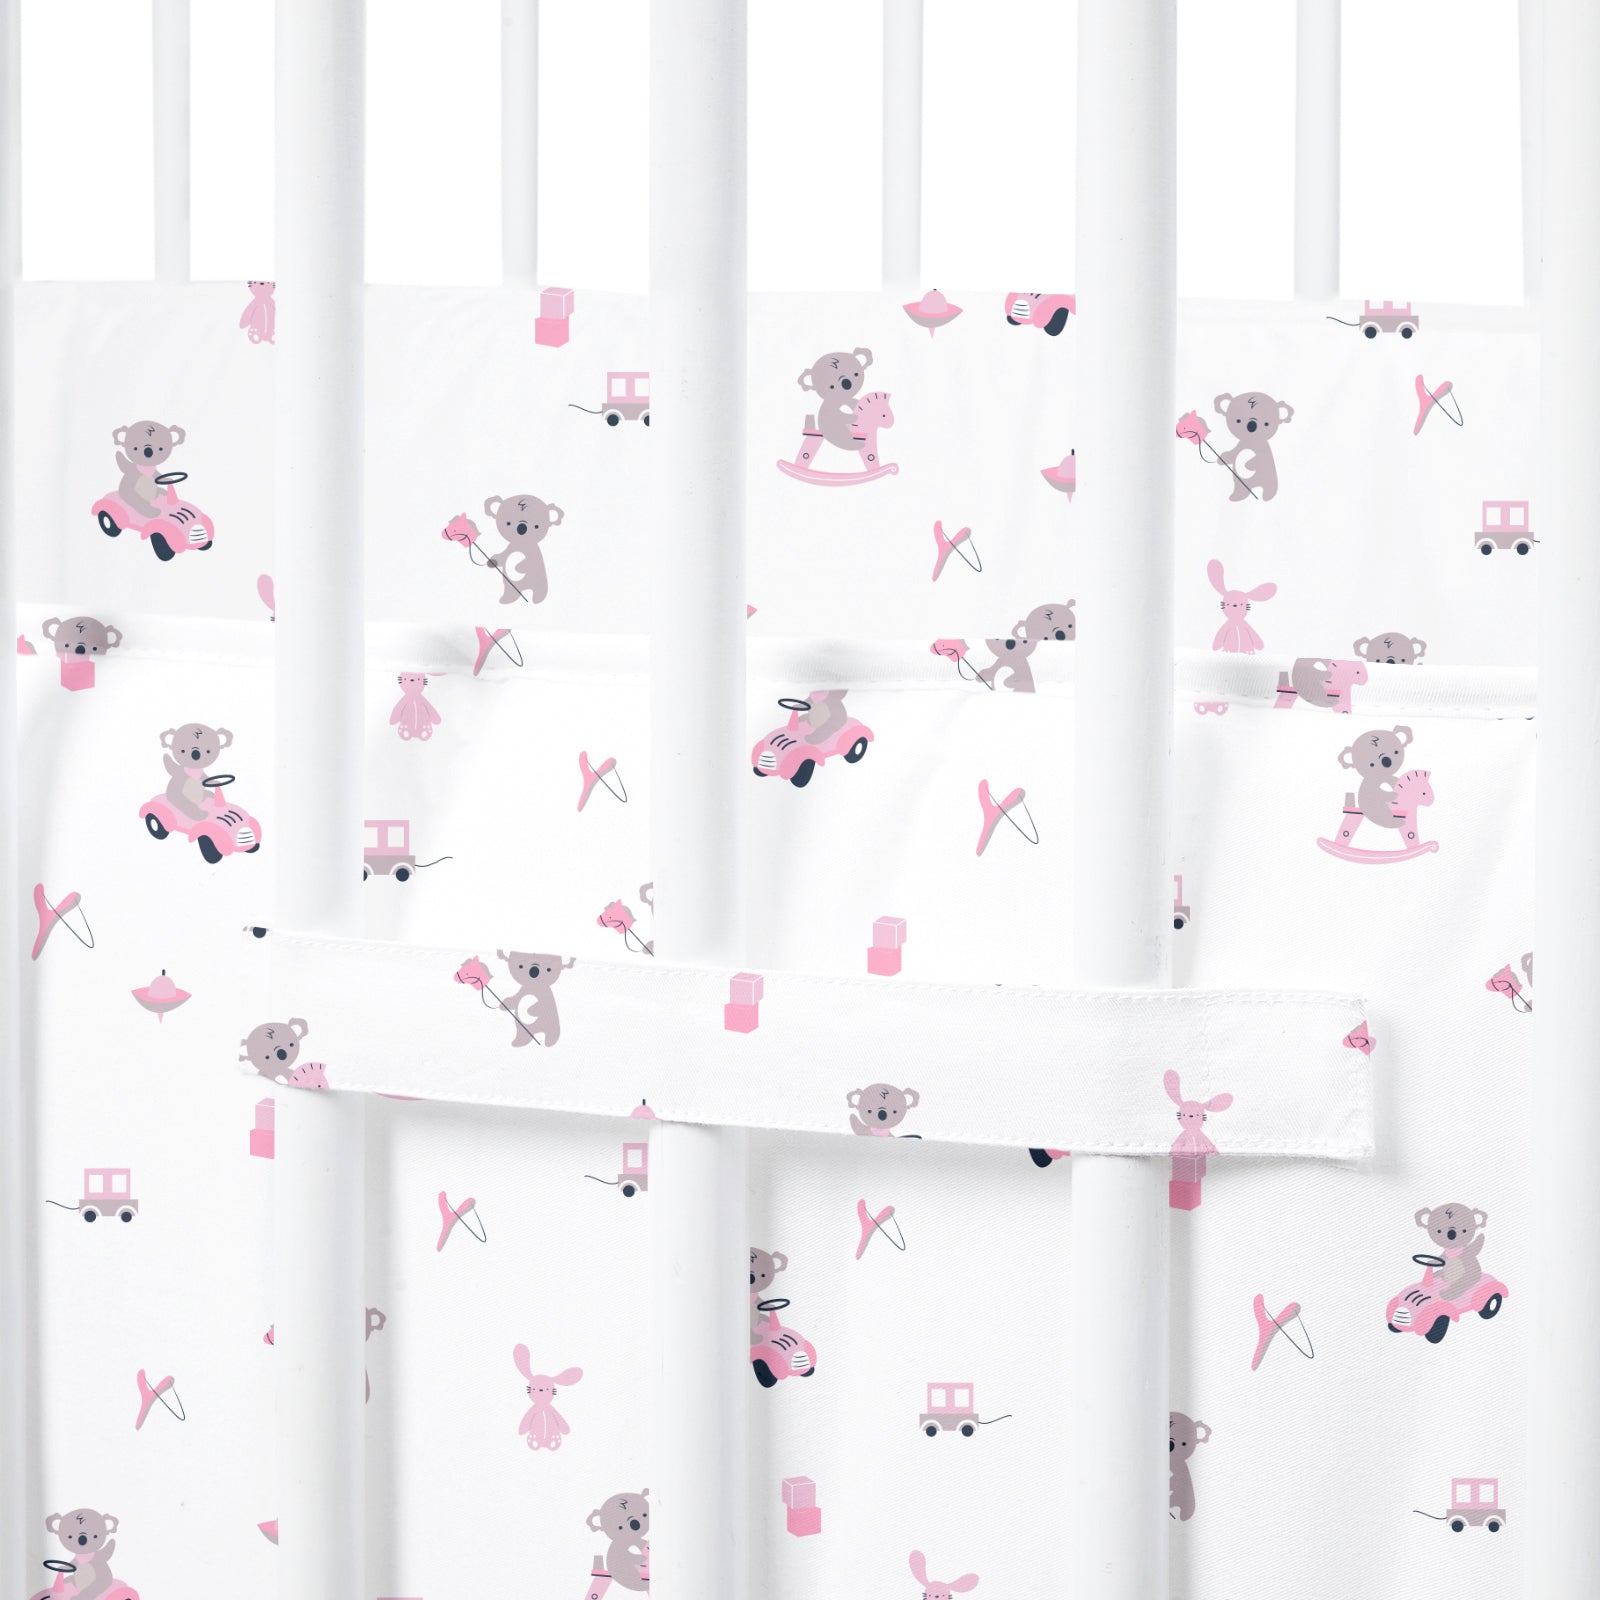 The White Cradle Baby Safe Cot Bumper Pad, Fits all Standard Cribs, Thick Padded Protective Liner for Child Nursery Bed, Soft Organic Cotton Fabric, Breathable, Non-Allergenic - Pink Koala